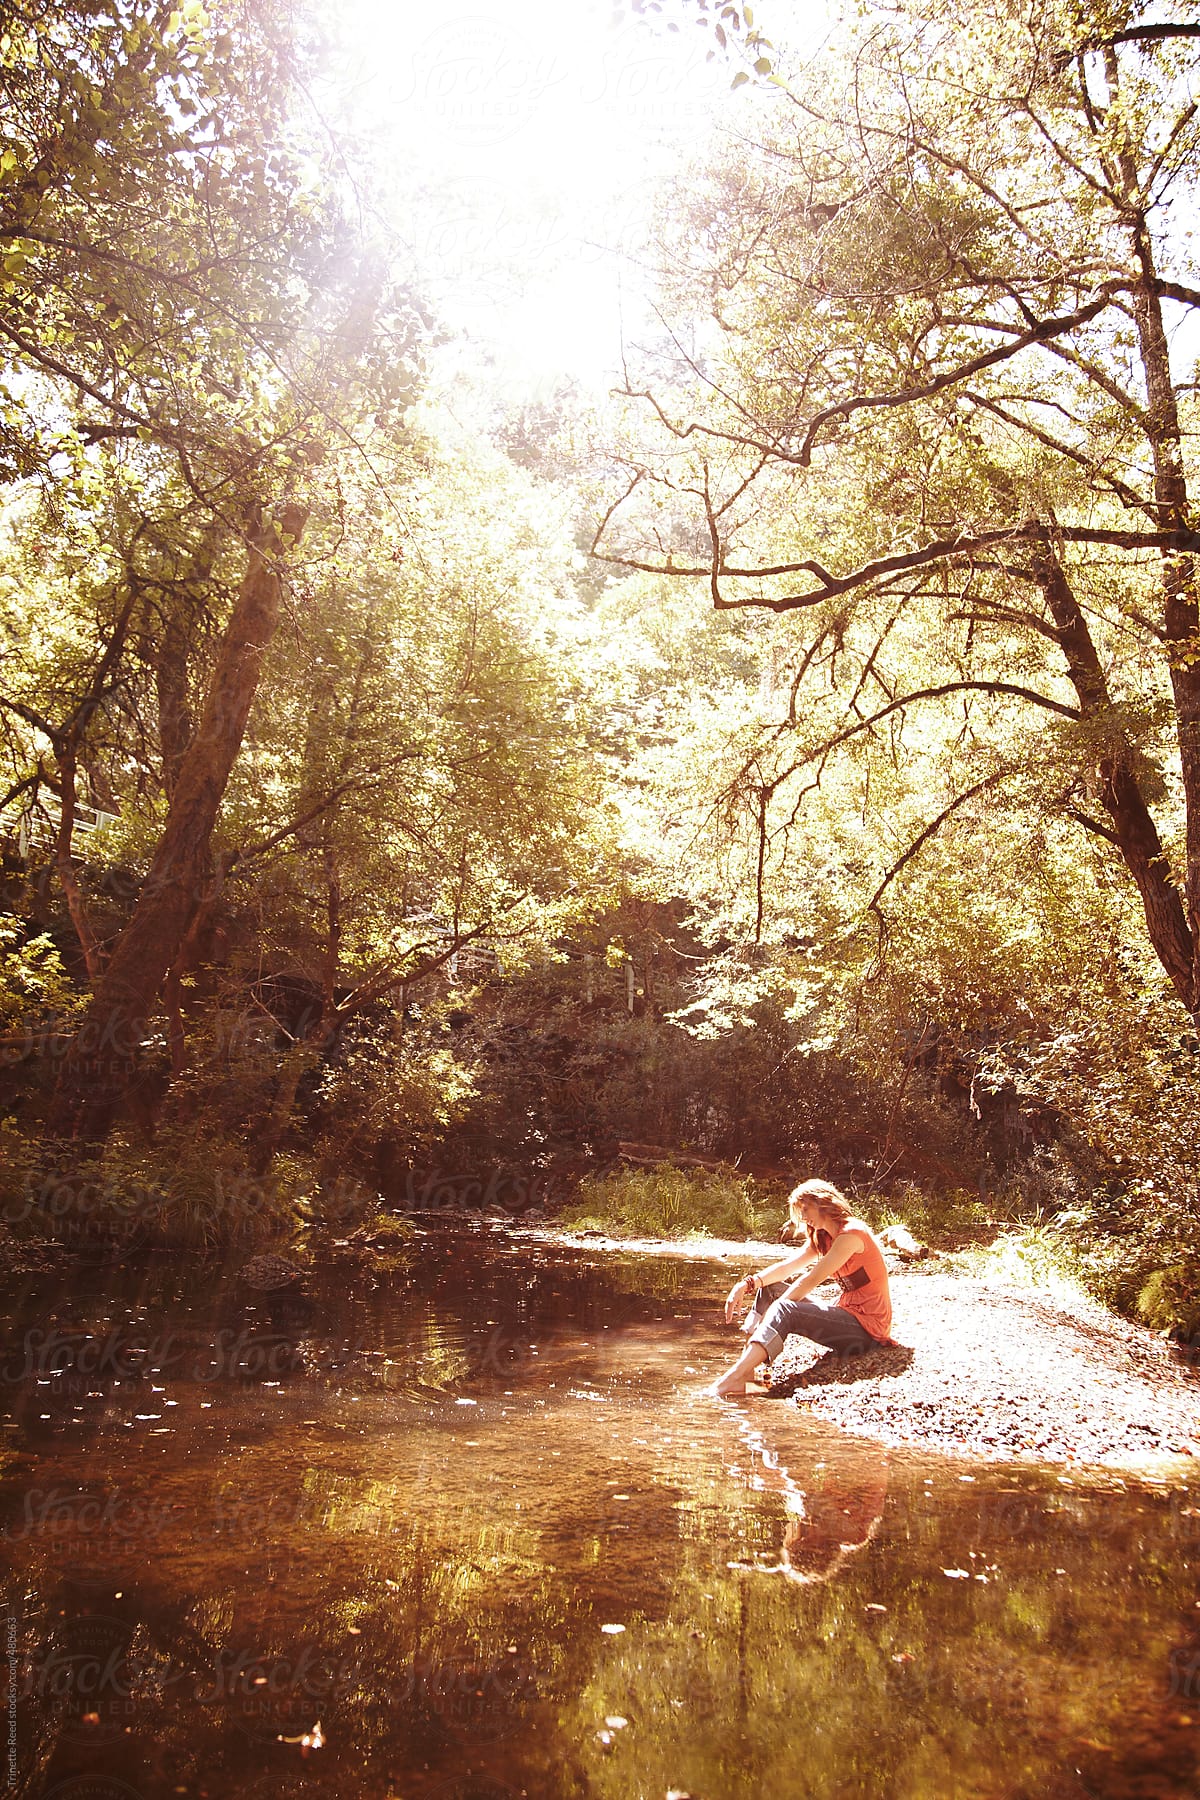 Woman relaxing in nature in the forest by a stream